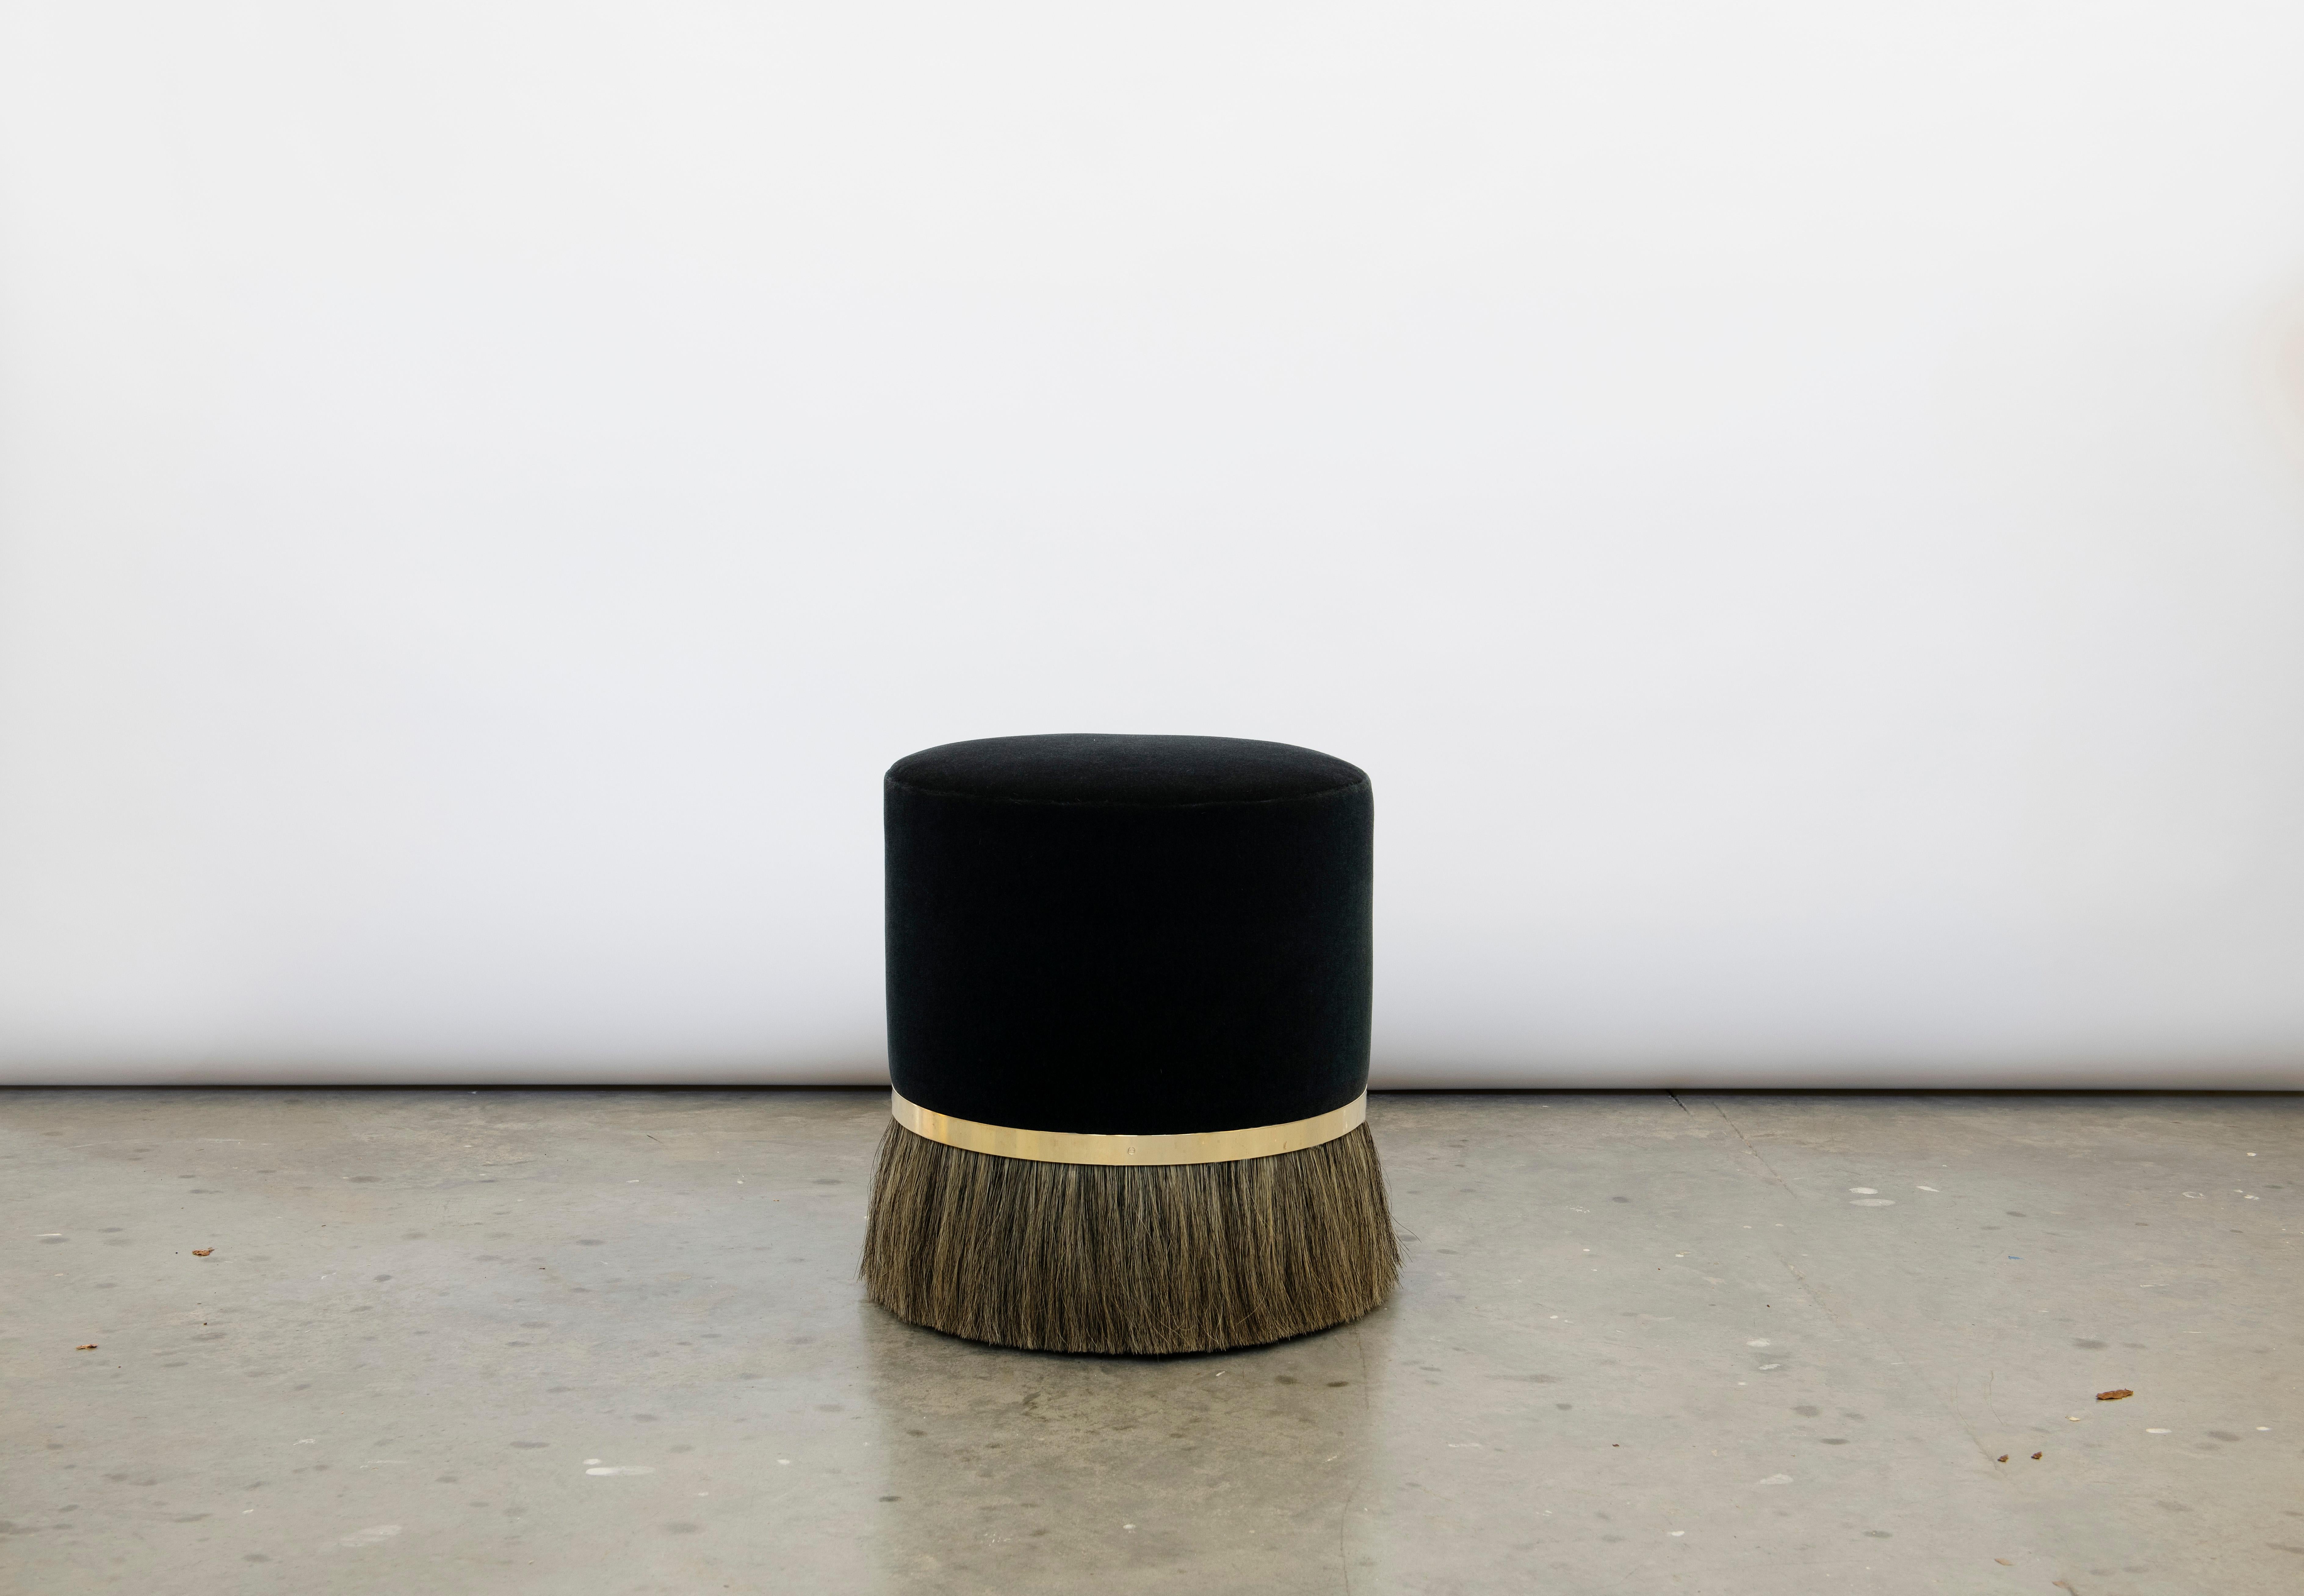 Refined yet wild, Thing 3's unique personality is accentuated with a distinctive combination of contrasting materials. This Thing 3 stool is in stock and available now as pictured, upholstered with Misia black velvet, featuring medium silver horse